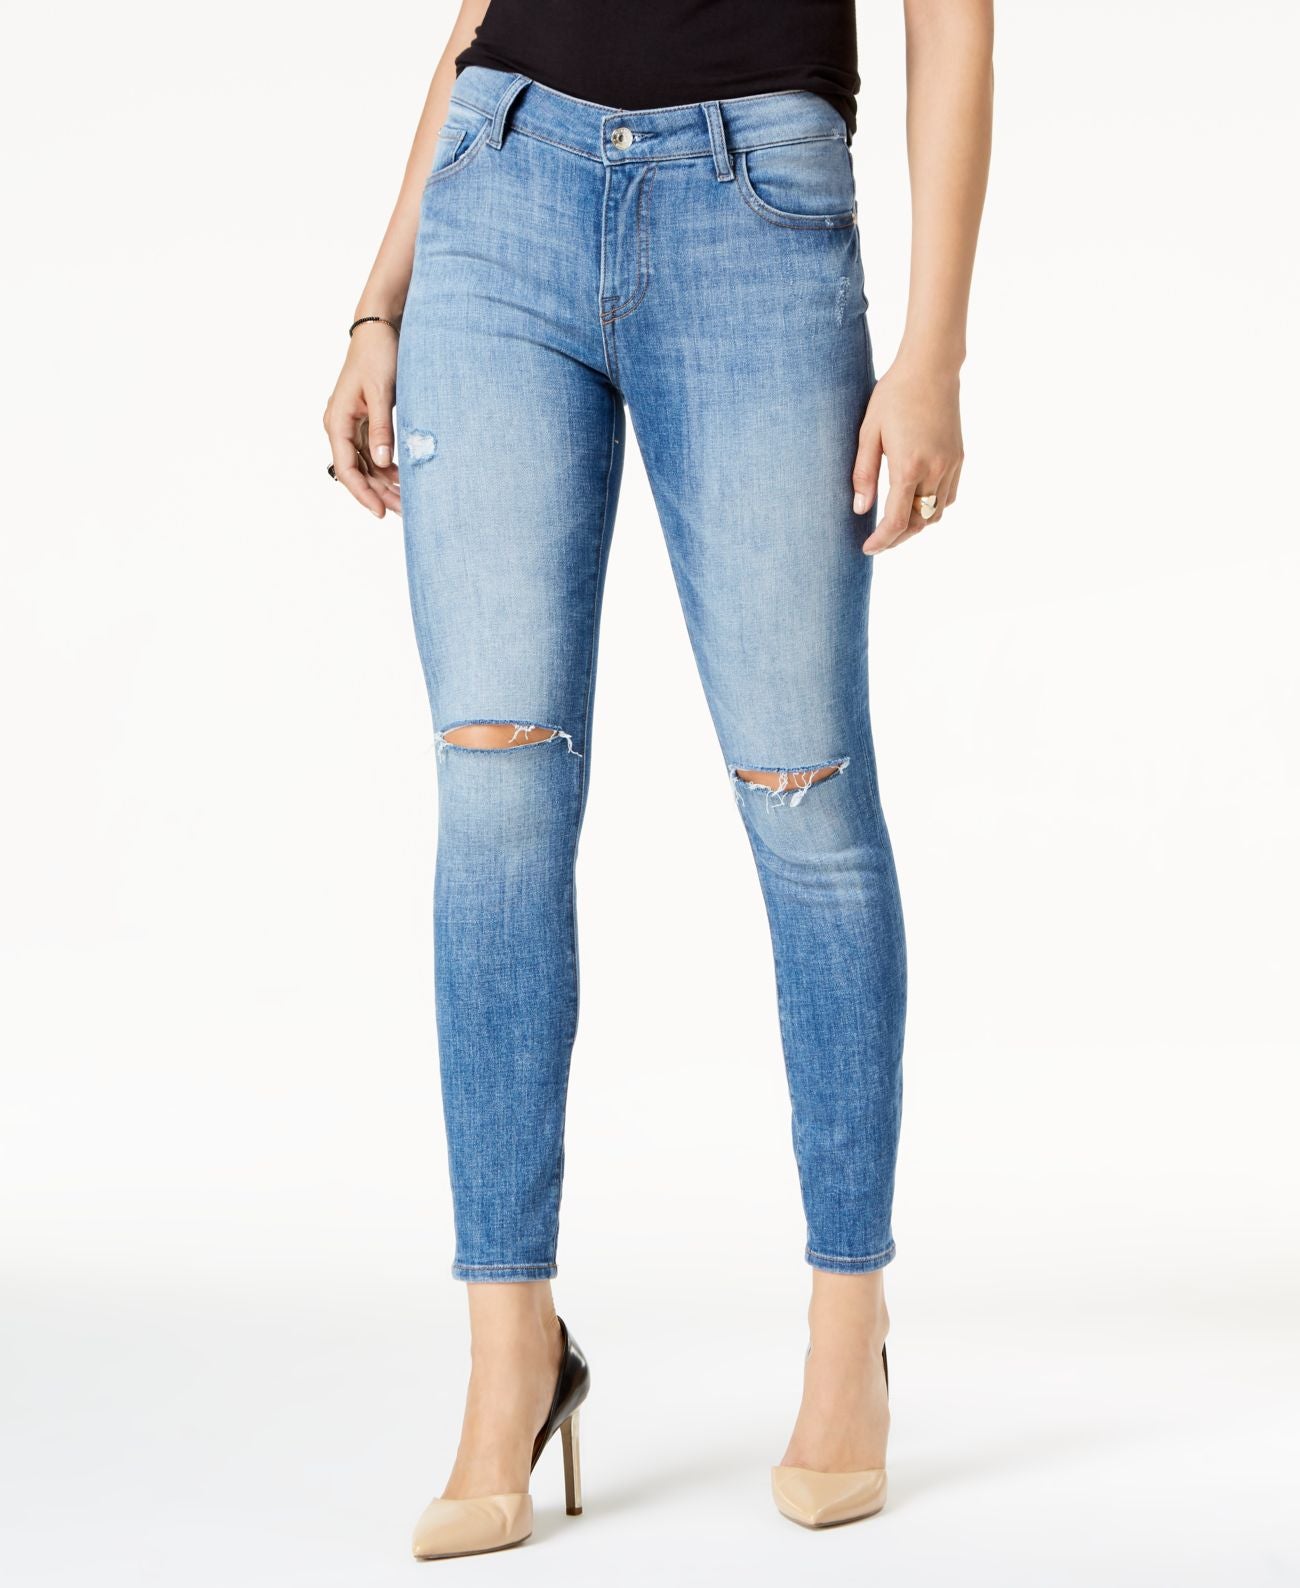 M1858 Womens Kristen Ripped Ankle Skinny Jeans